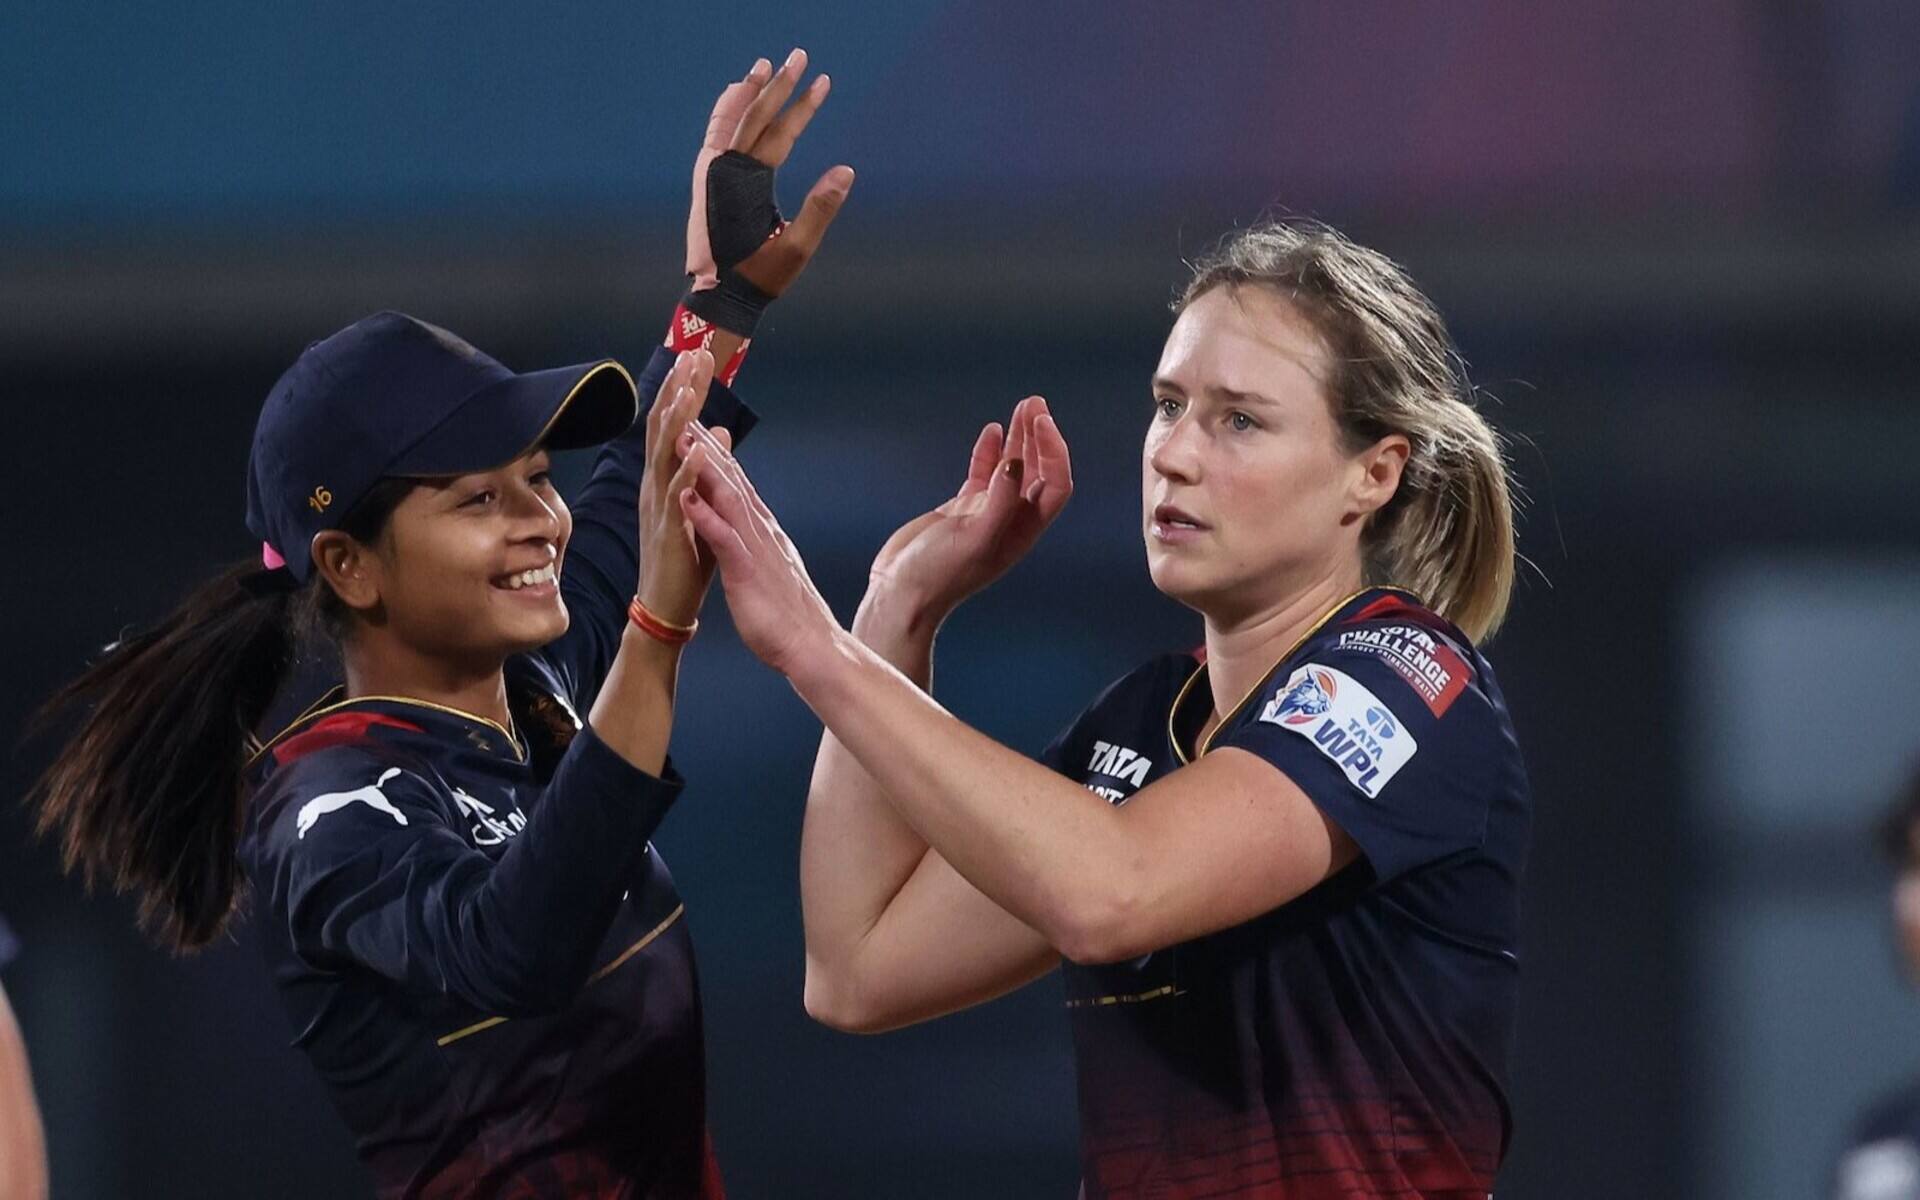 Ellyse Perry cleaned up S Sajana (Source: WPL)